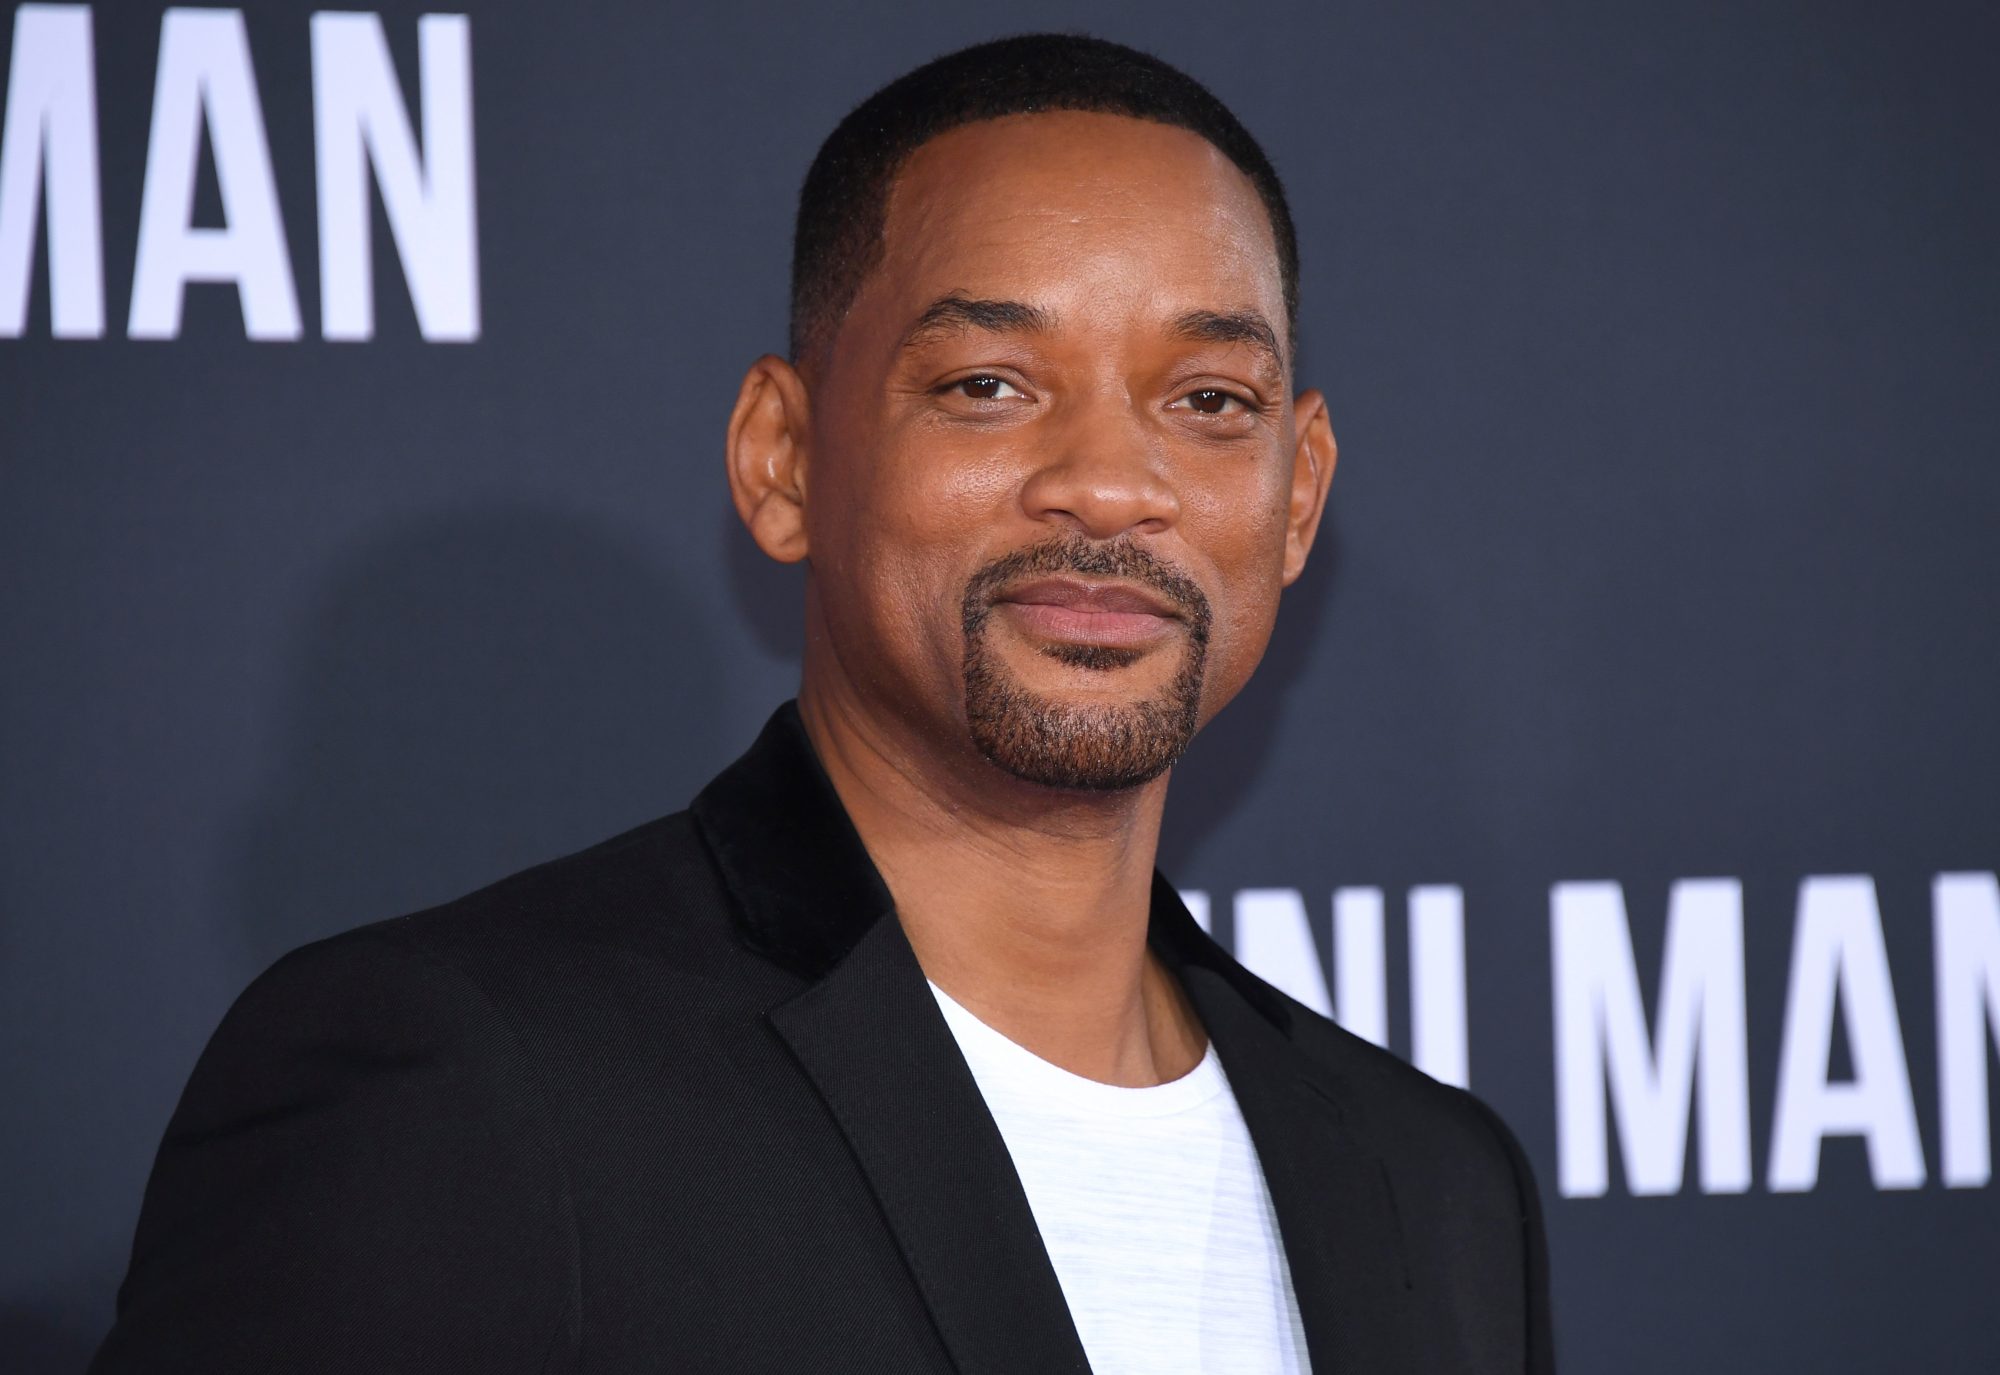 Will Smith Refused To Leave Oscars After Slap, Academy says!